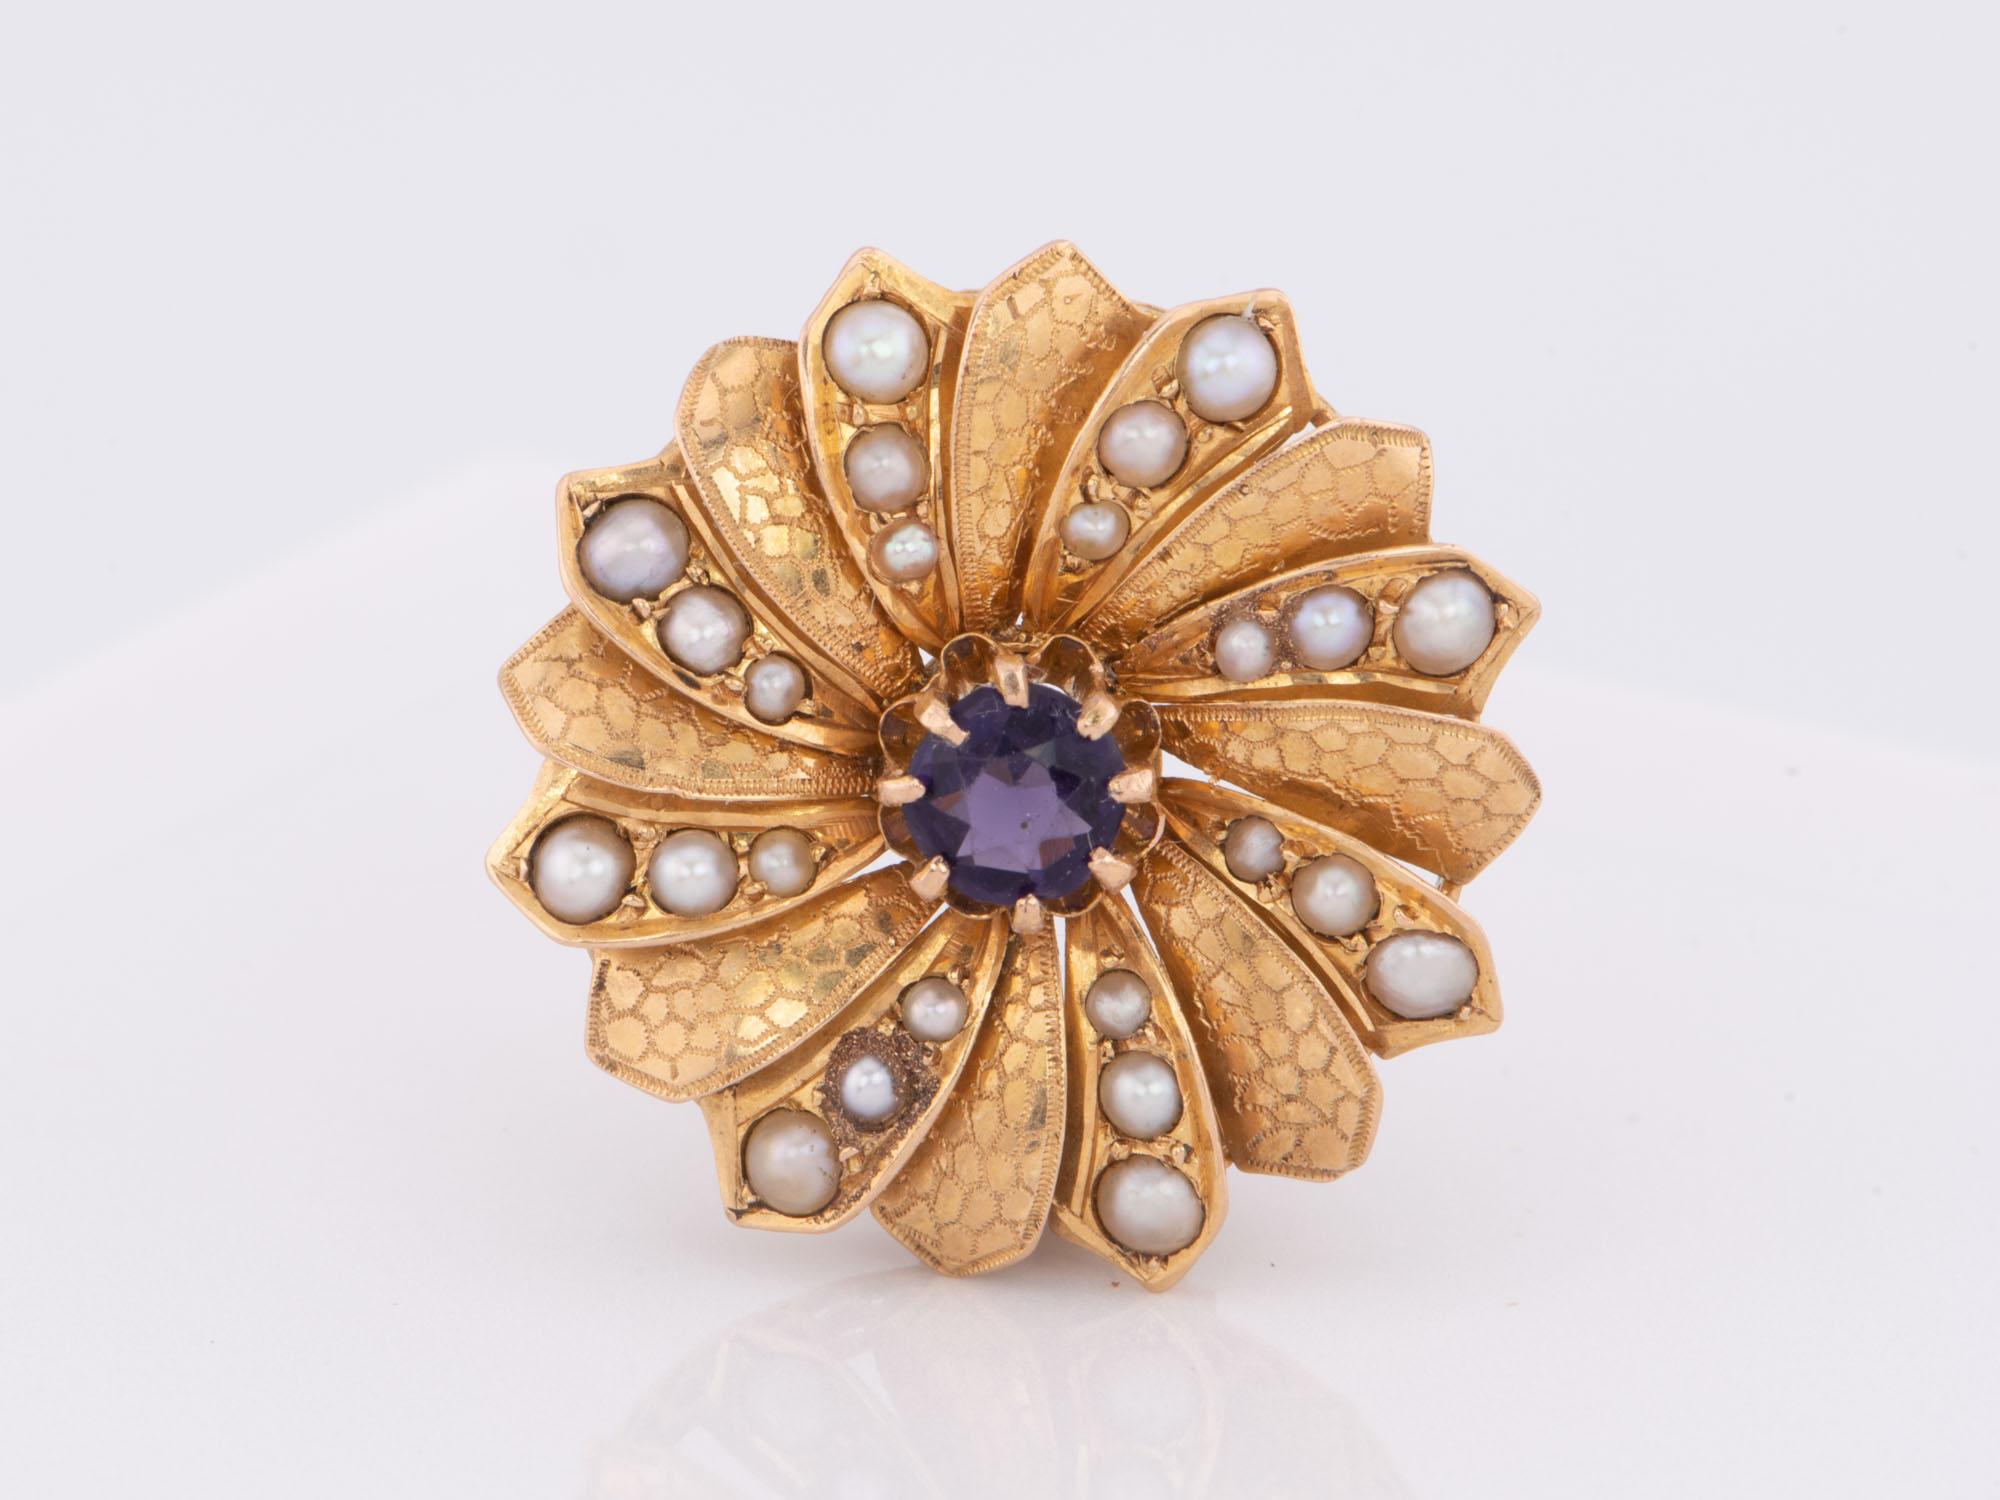 This exquisite 14K gold brooch features a unique spiral flower design encrusted with delicate seed pearls and a beautiful amethyst in the center, making it a truly eye-catching piece of jewelry that any fashionista would love. This luxurious brooch